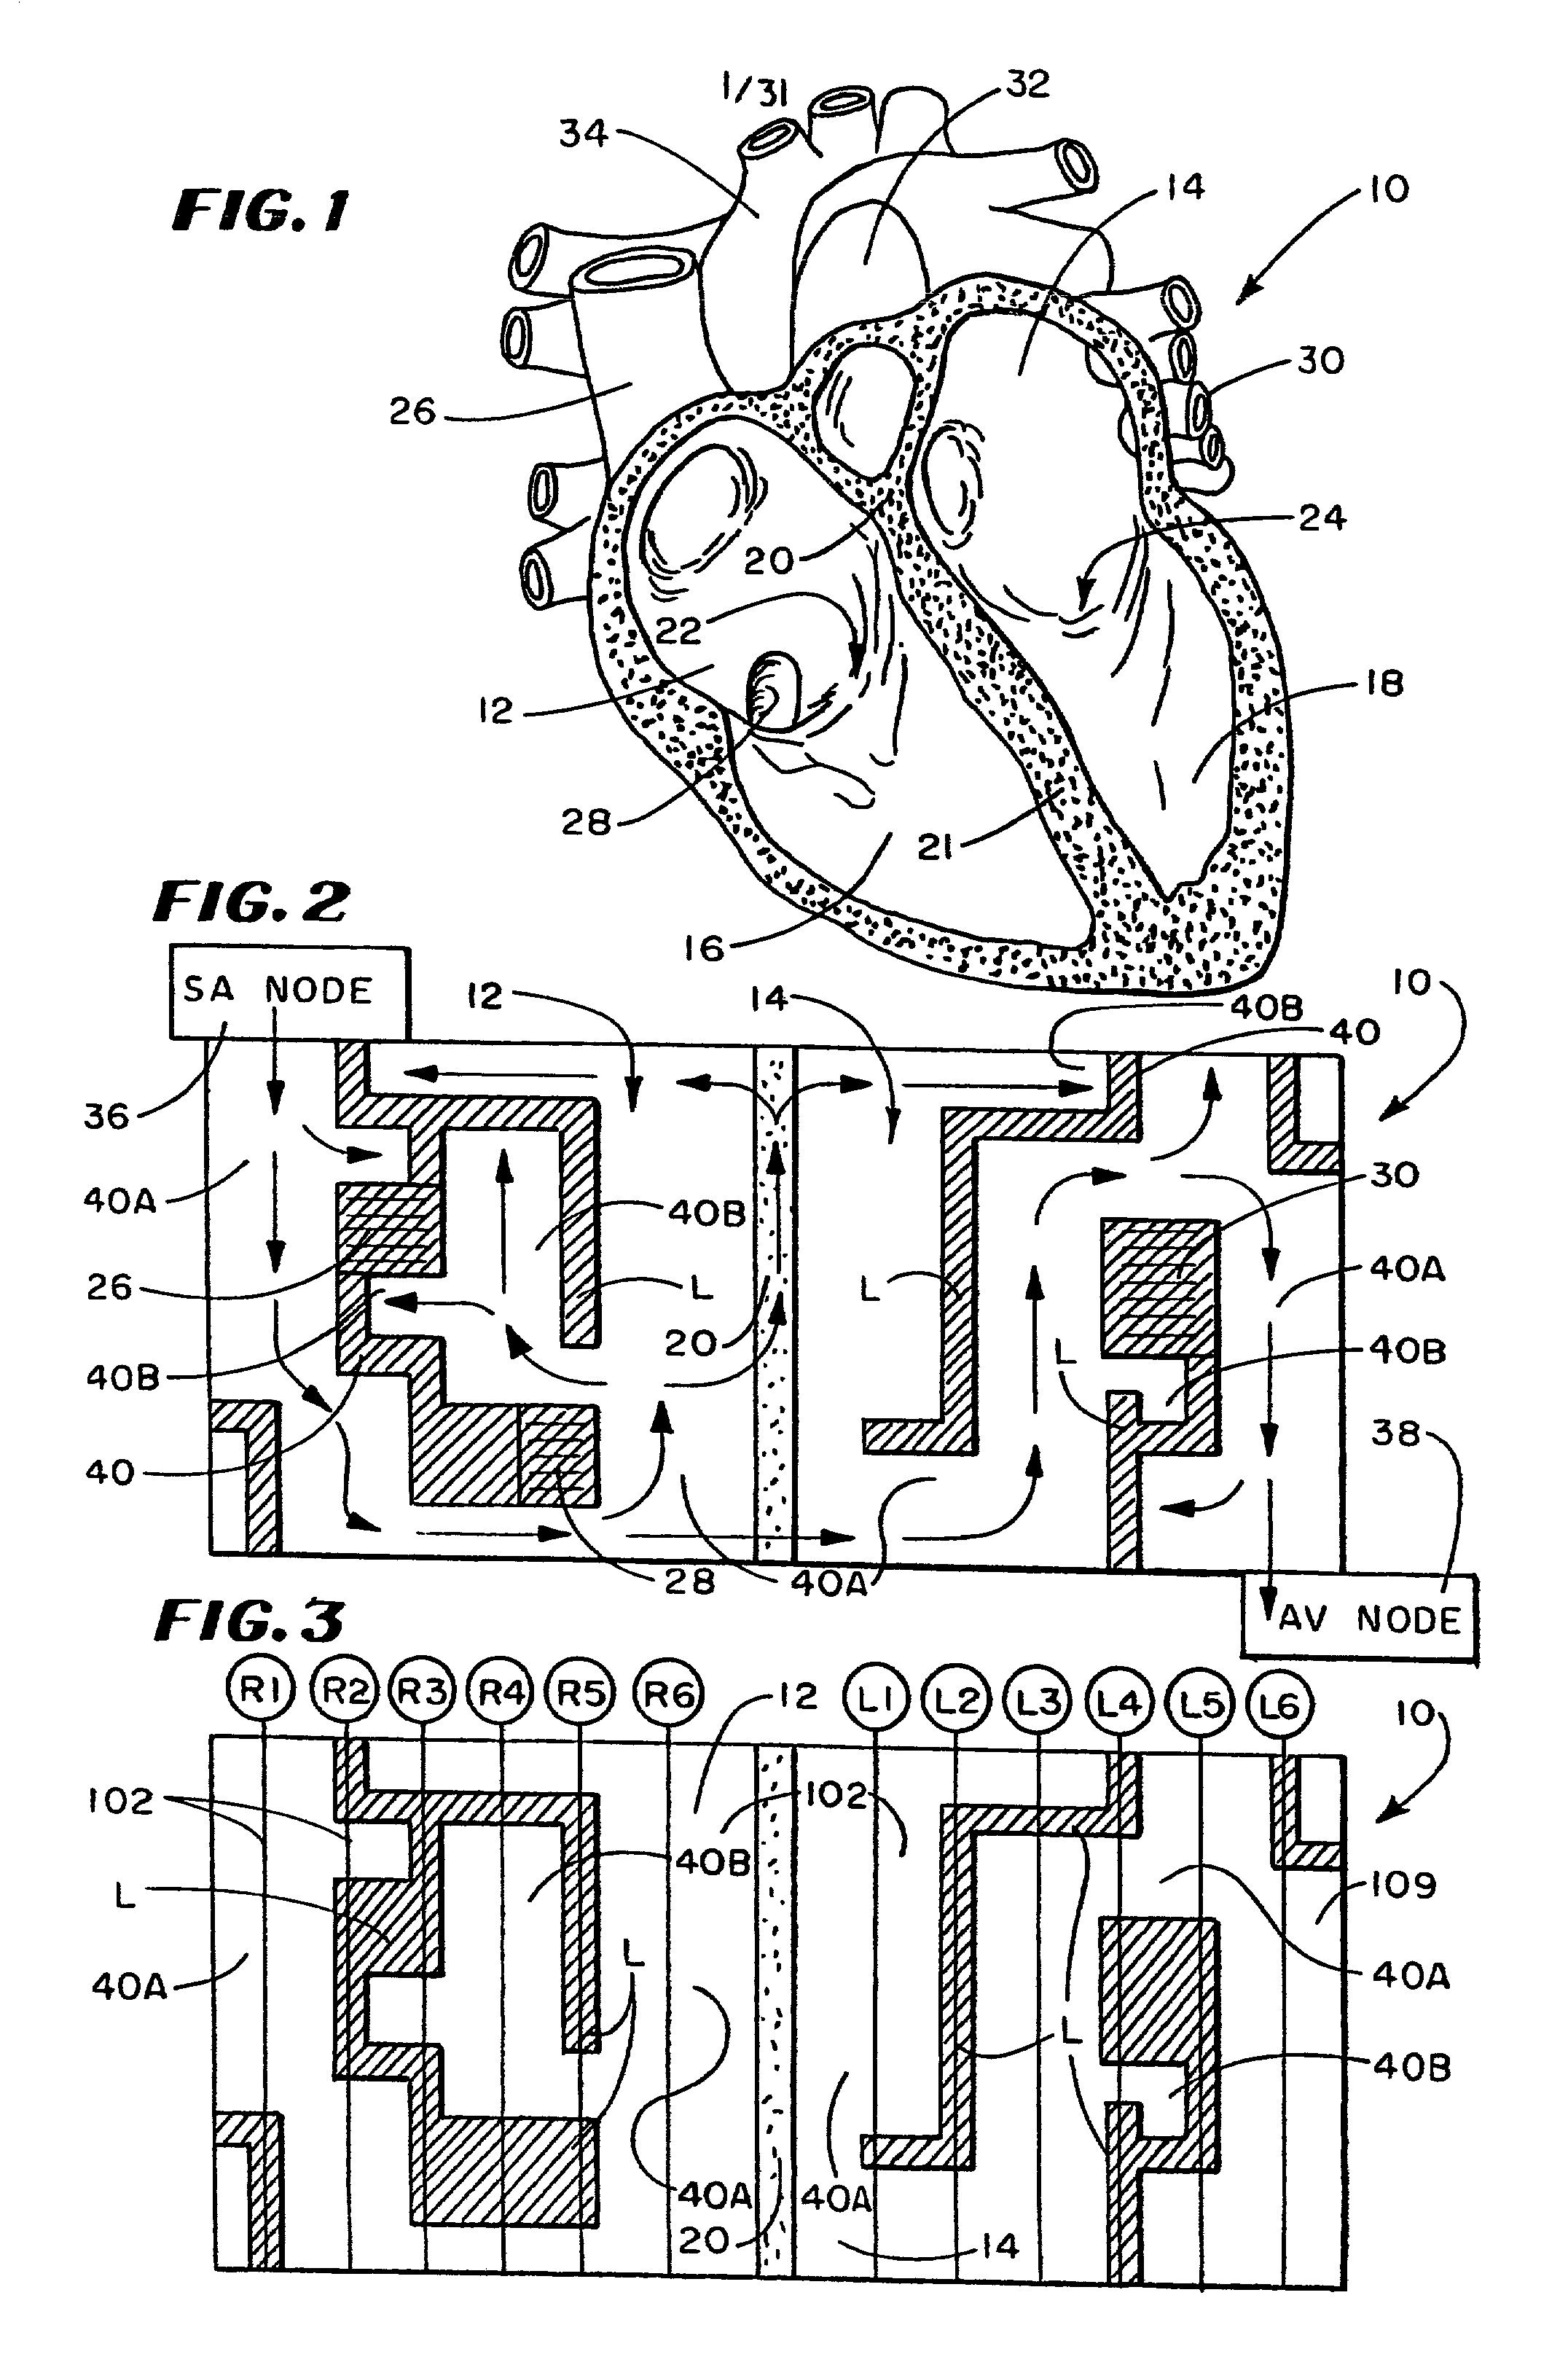 Composite structures and methods for ablating tissue to form complex lesion patterns in the treatment of cardiac conditions and the like